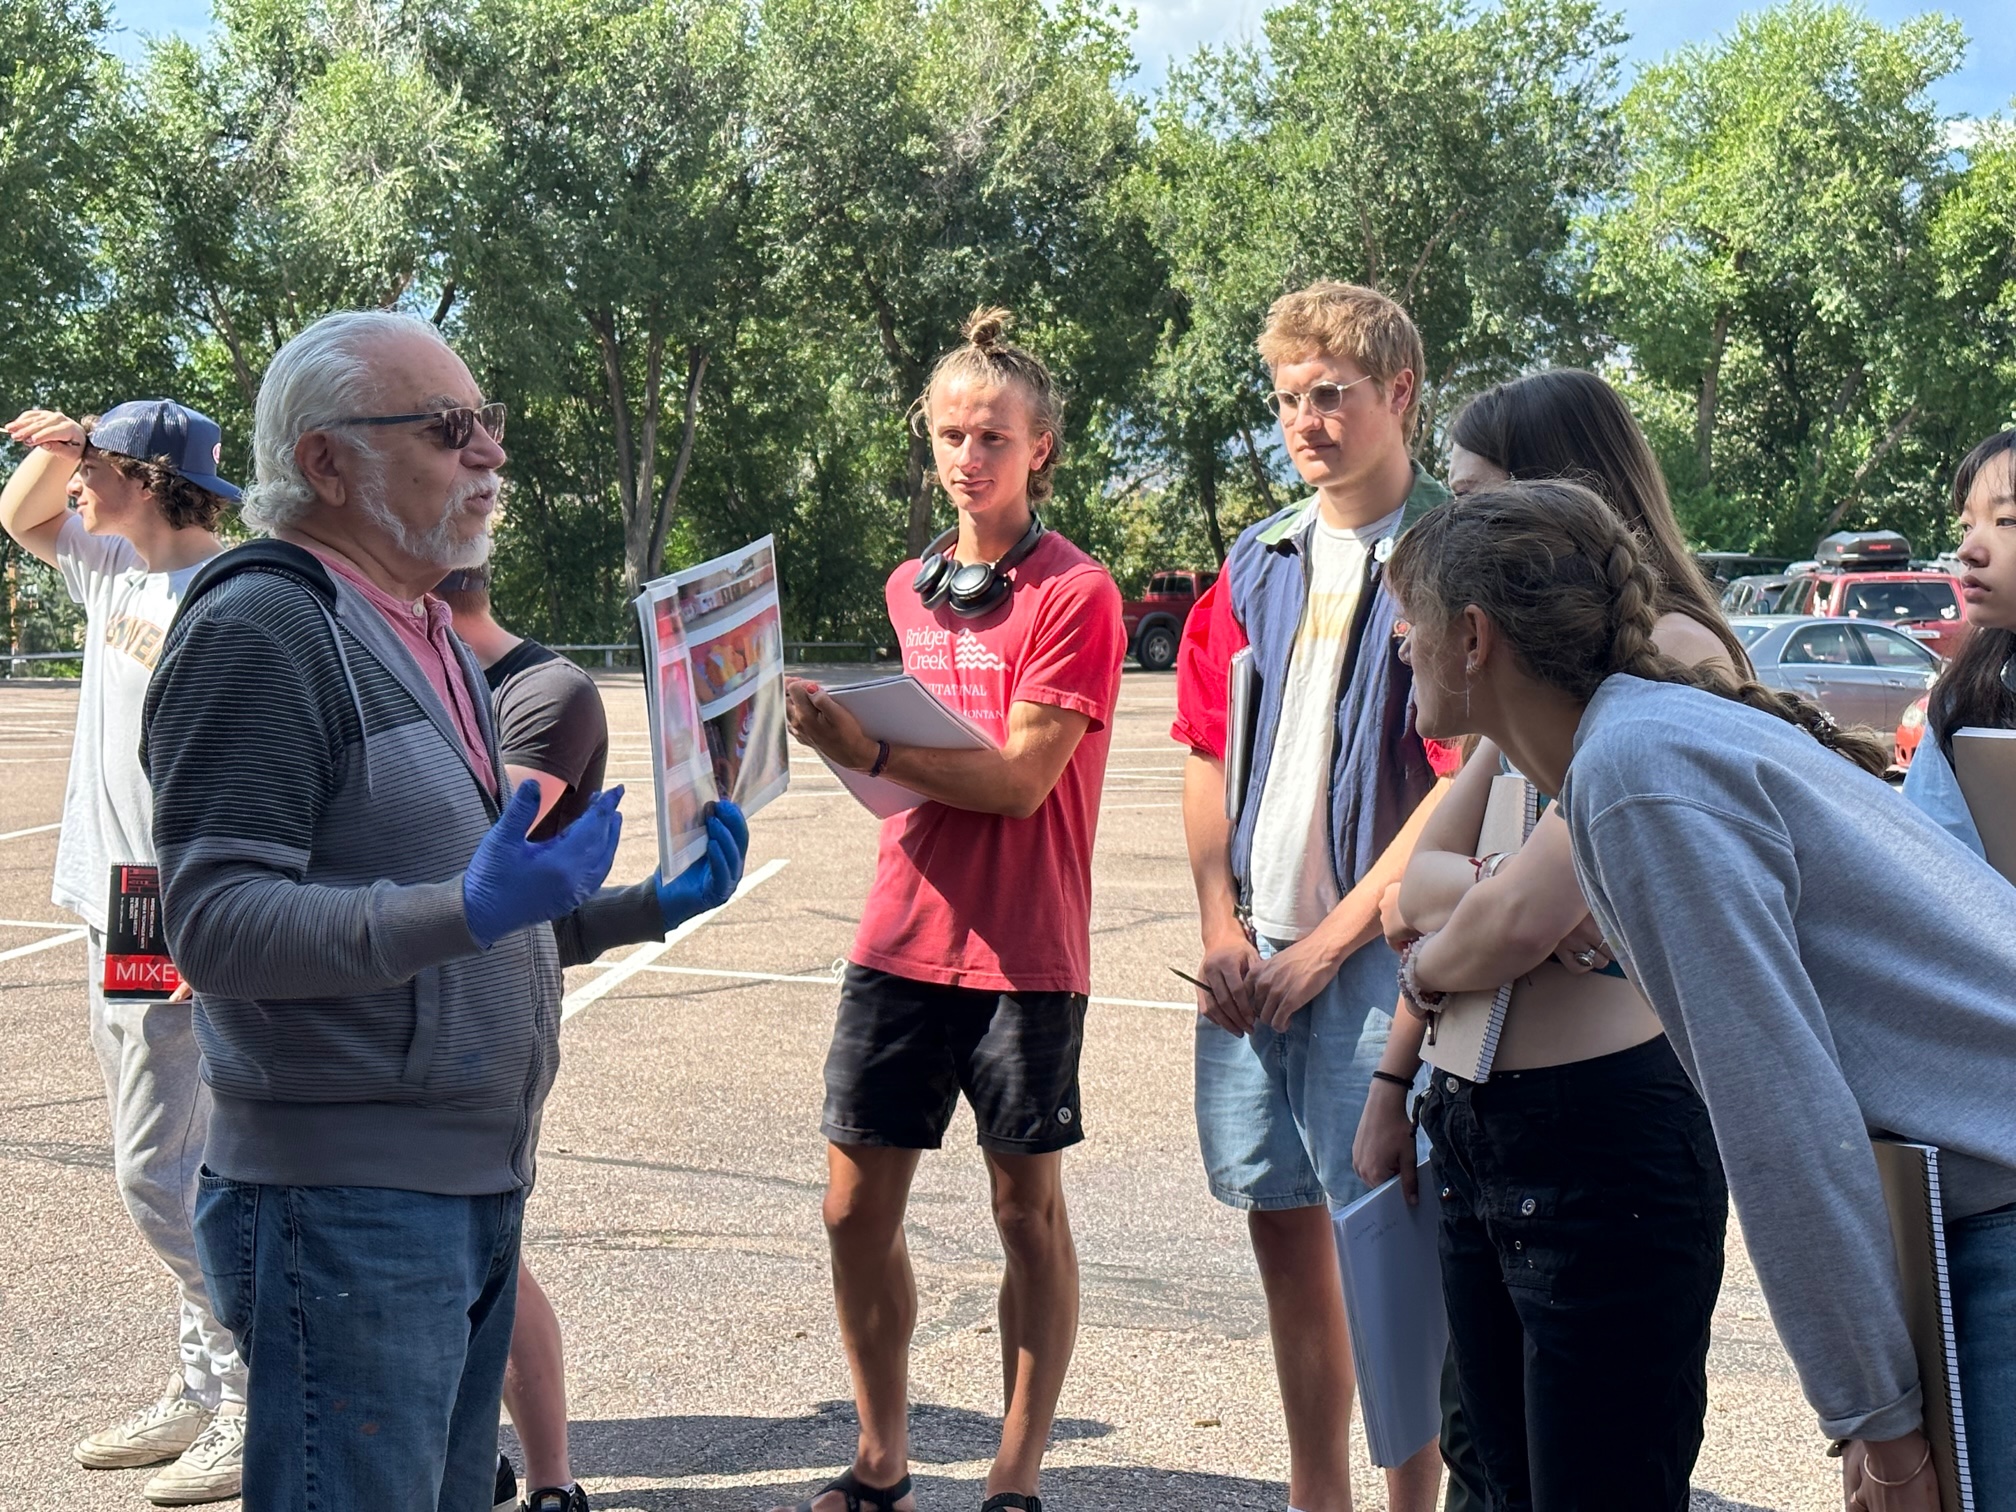 Martinez shares a book of his work with students from a CC Arts class, who are learning about mural paintings. Photo by Alexa Gromko / Colorado College